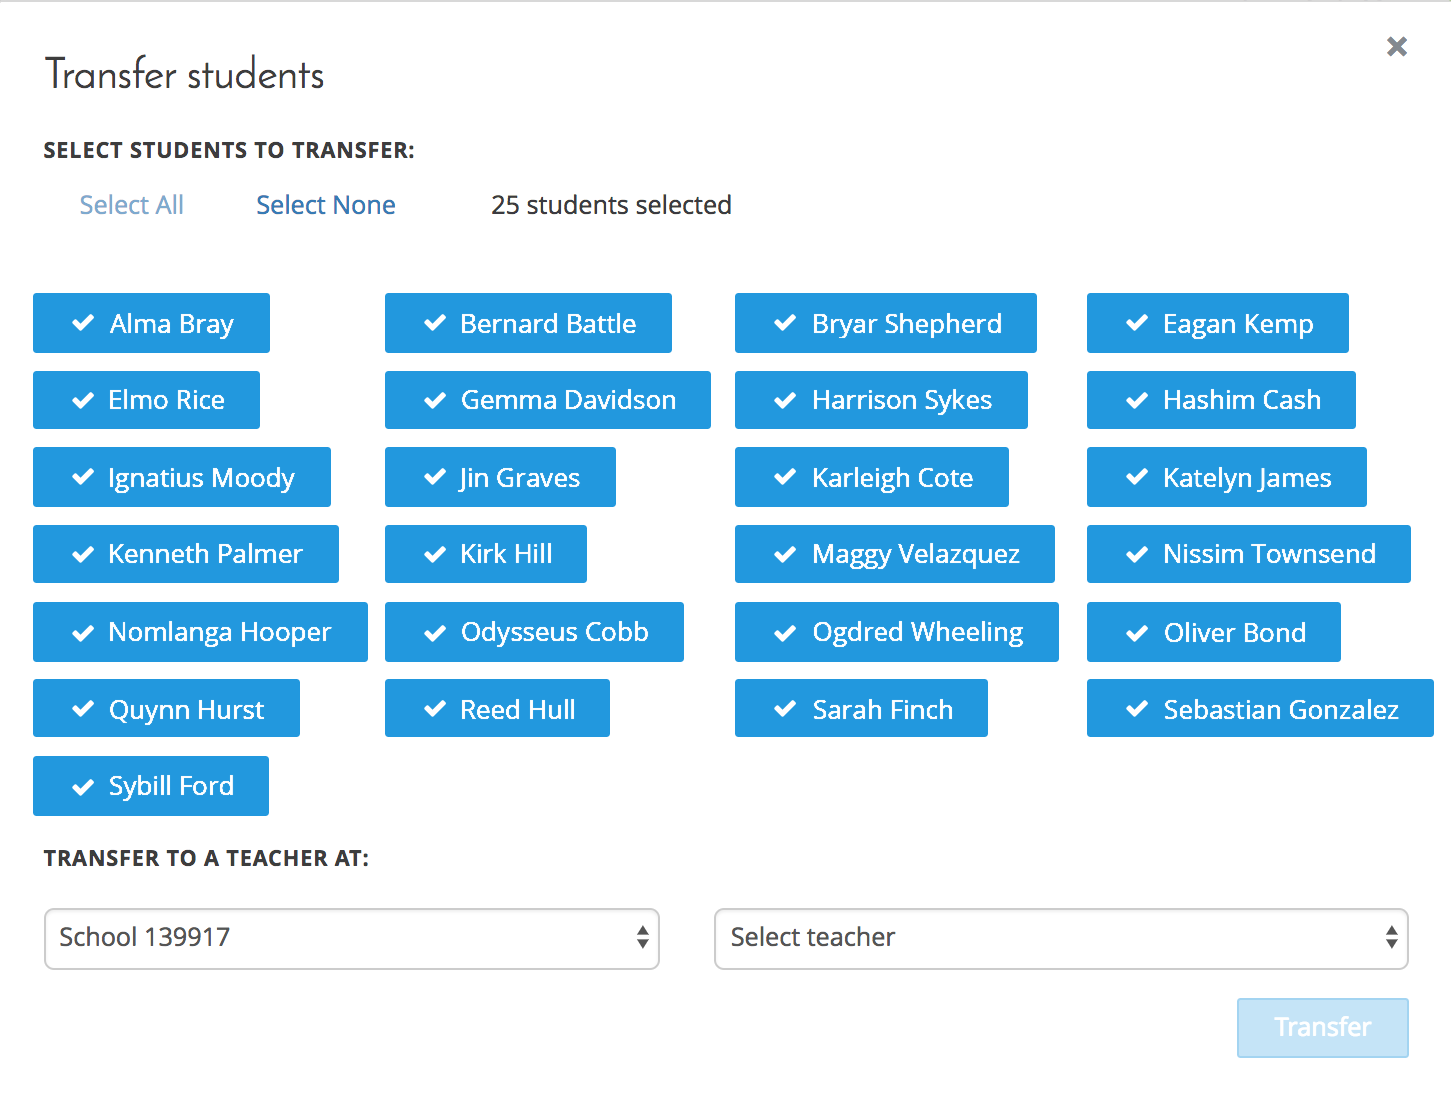 The Transfer students screen, with all the students already selected. At the bottom are drop-down lists where you can select a school and teacher to transfer the students to. The Transfer button is below the drop-down lists.